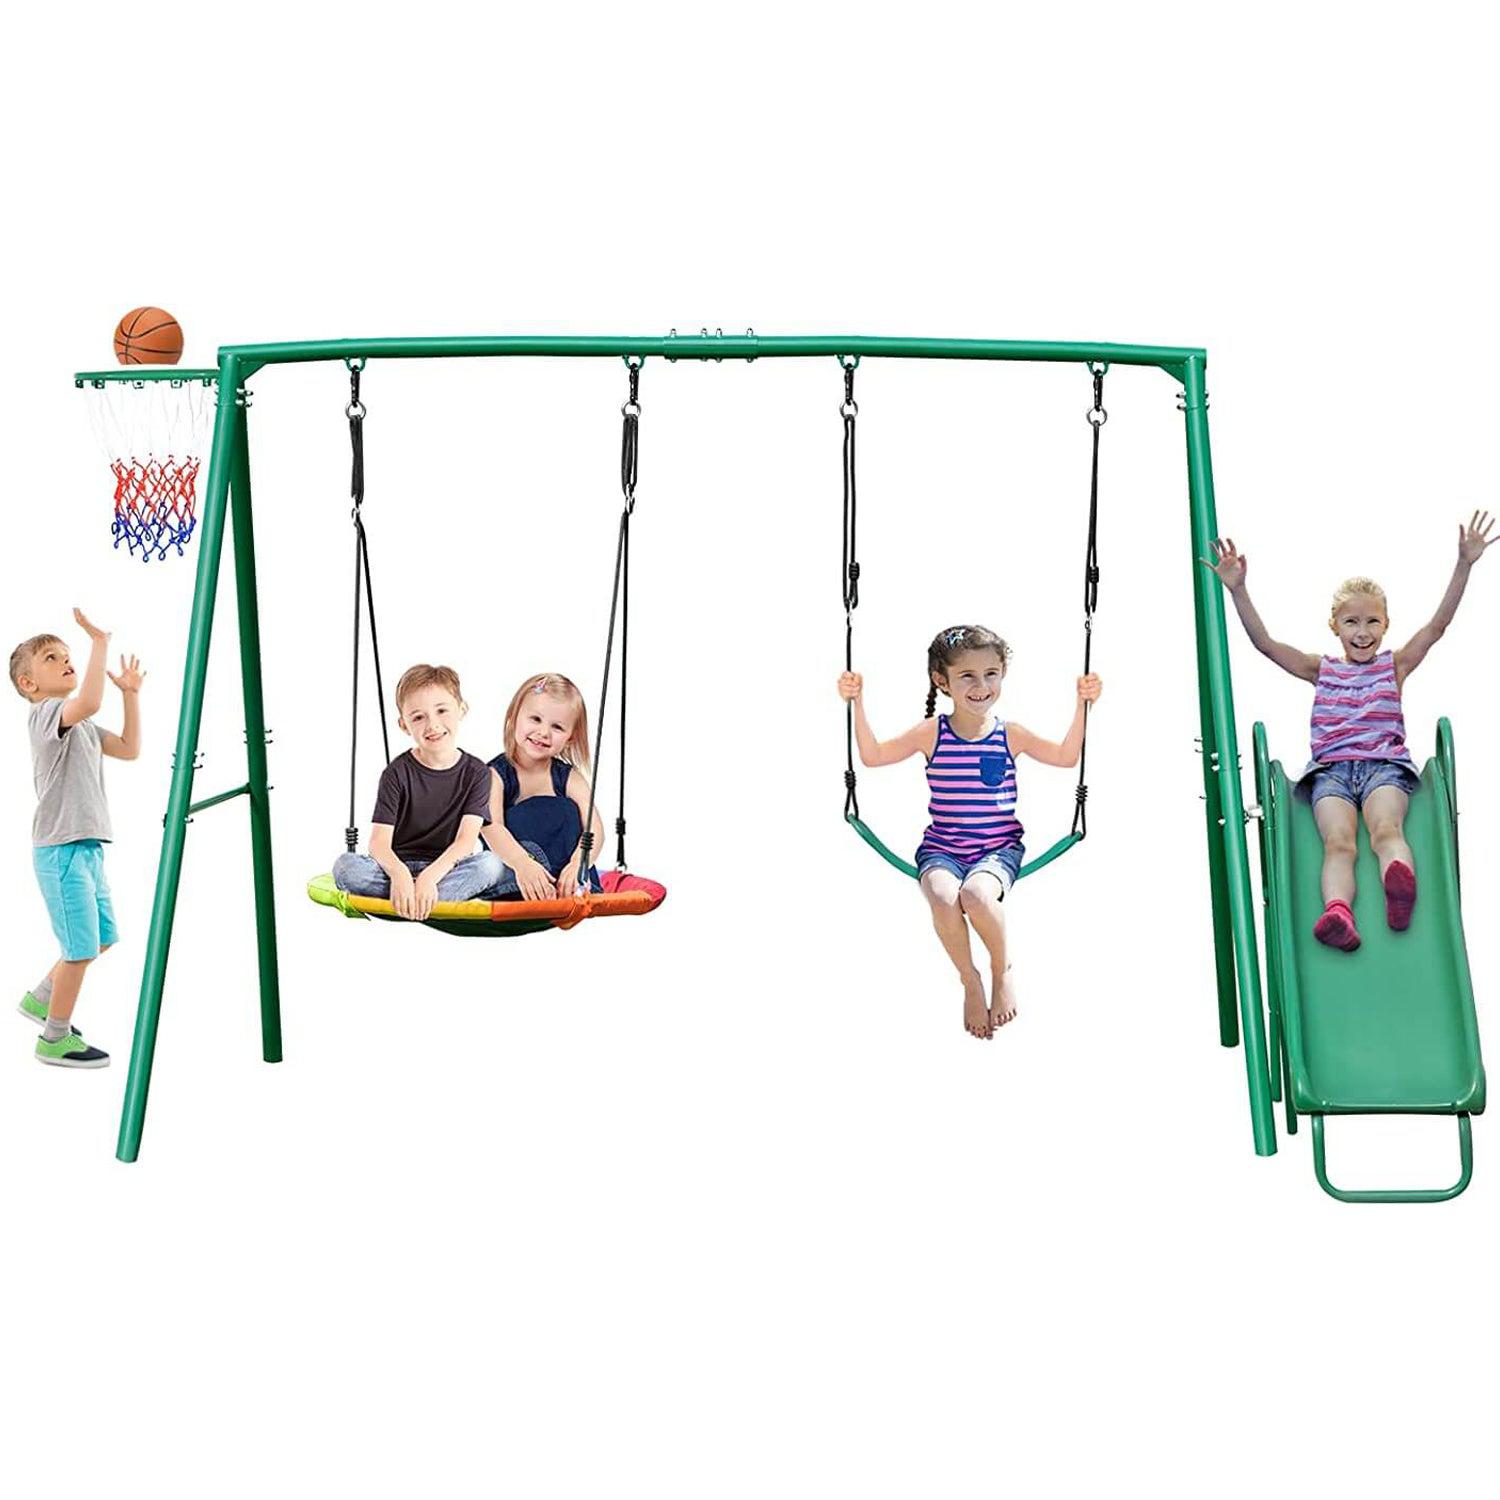 Swing Sets for Backyard with Slide, Metal Swing Stand, Saucer